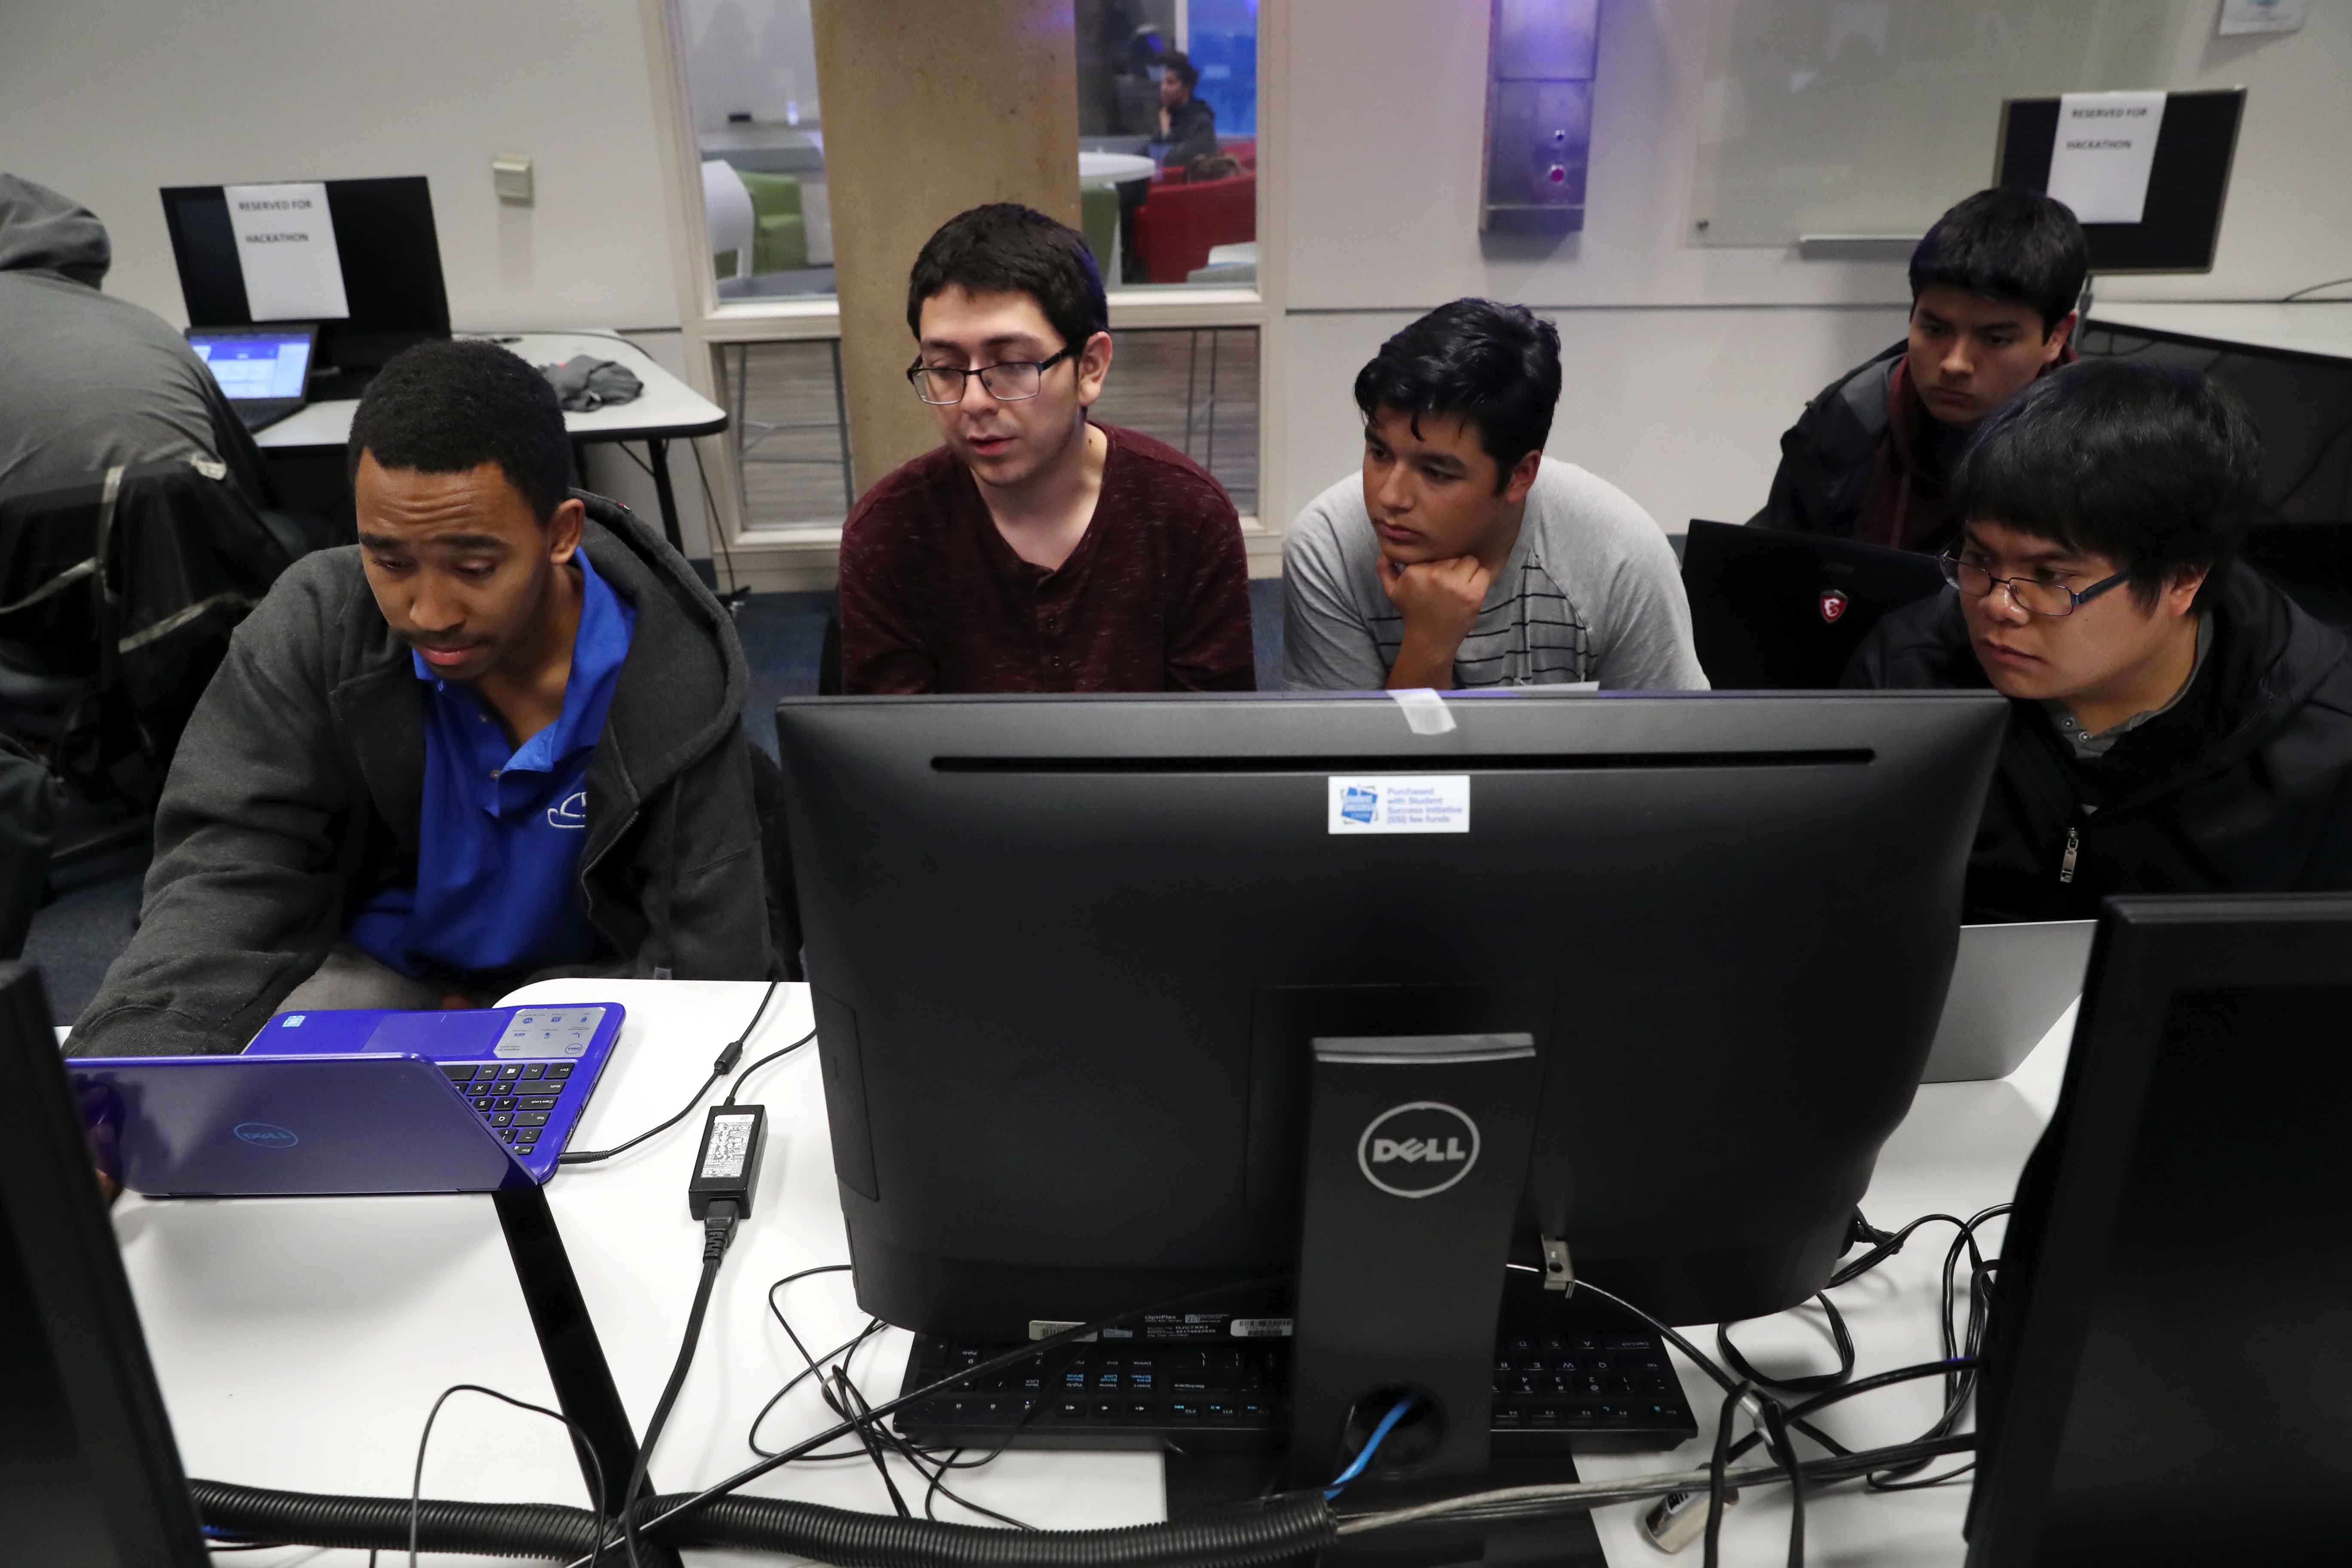 The hackathon was sponsored by the Institute of Electrical and Electronics Engineers (IEEE) foothill section, Google, CSUSB Associated Students Inc. (ASI), the university’s Computer Science and Engineering Club (CSE), as well as Information Technology Ser